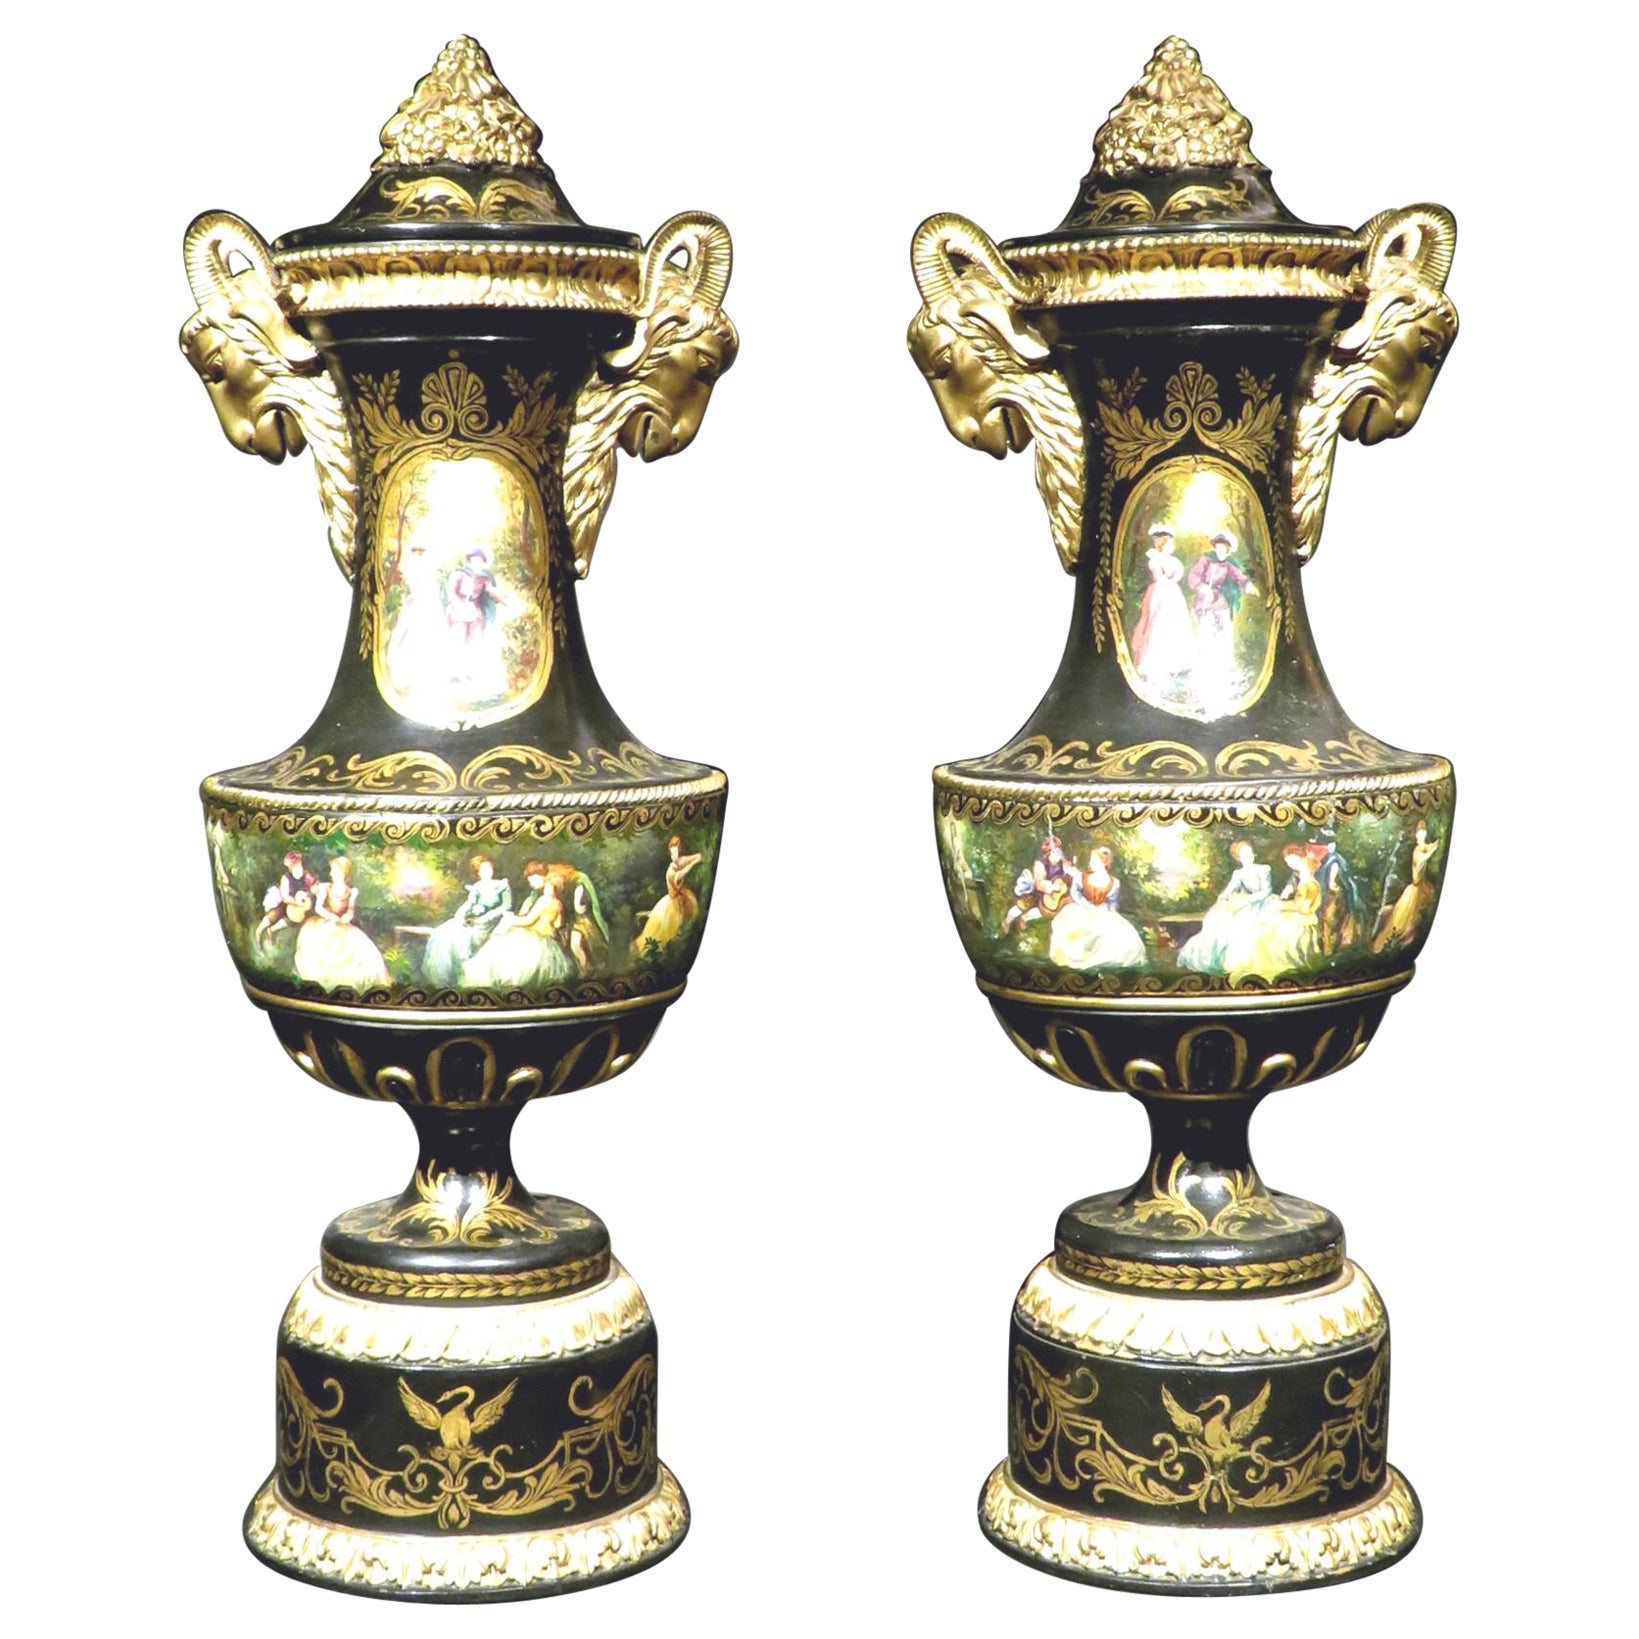 Exceptional Pair of Neoclassical Revival Hand Painted Wooden Urns, circa 1880 For Sale